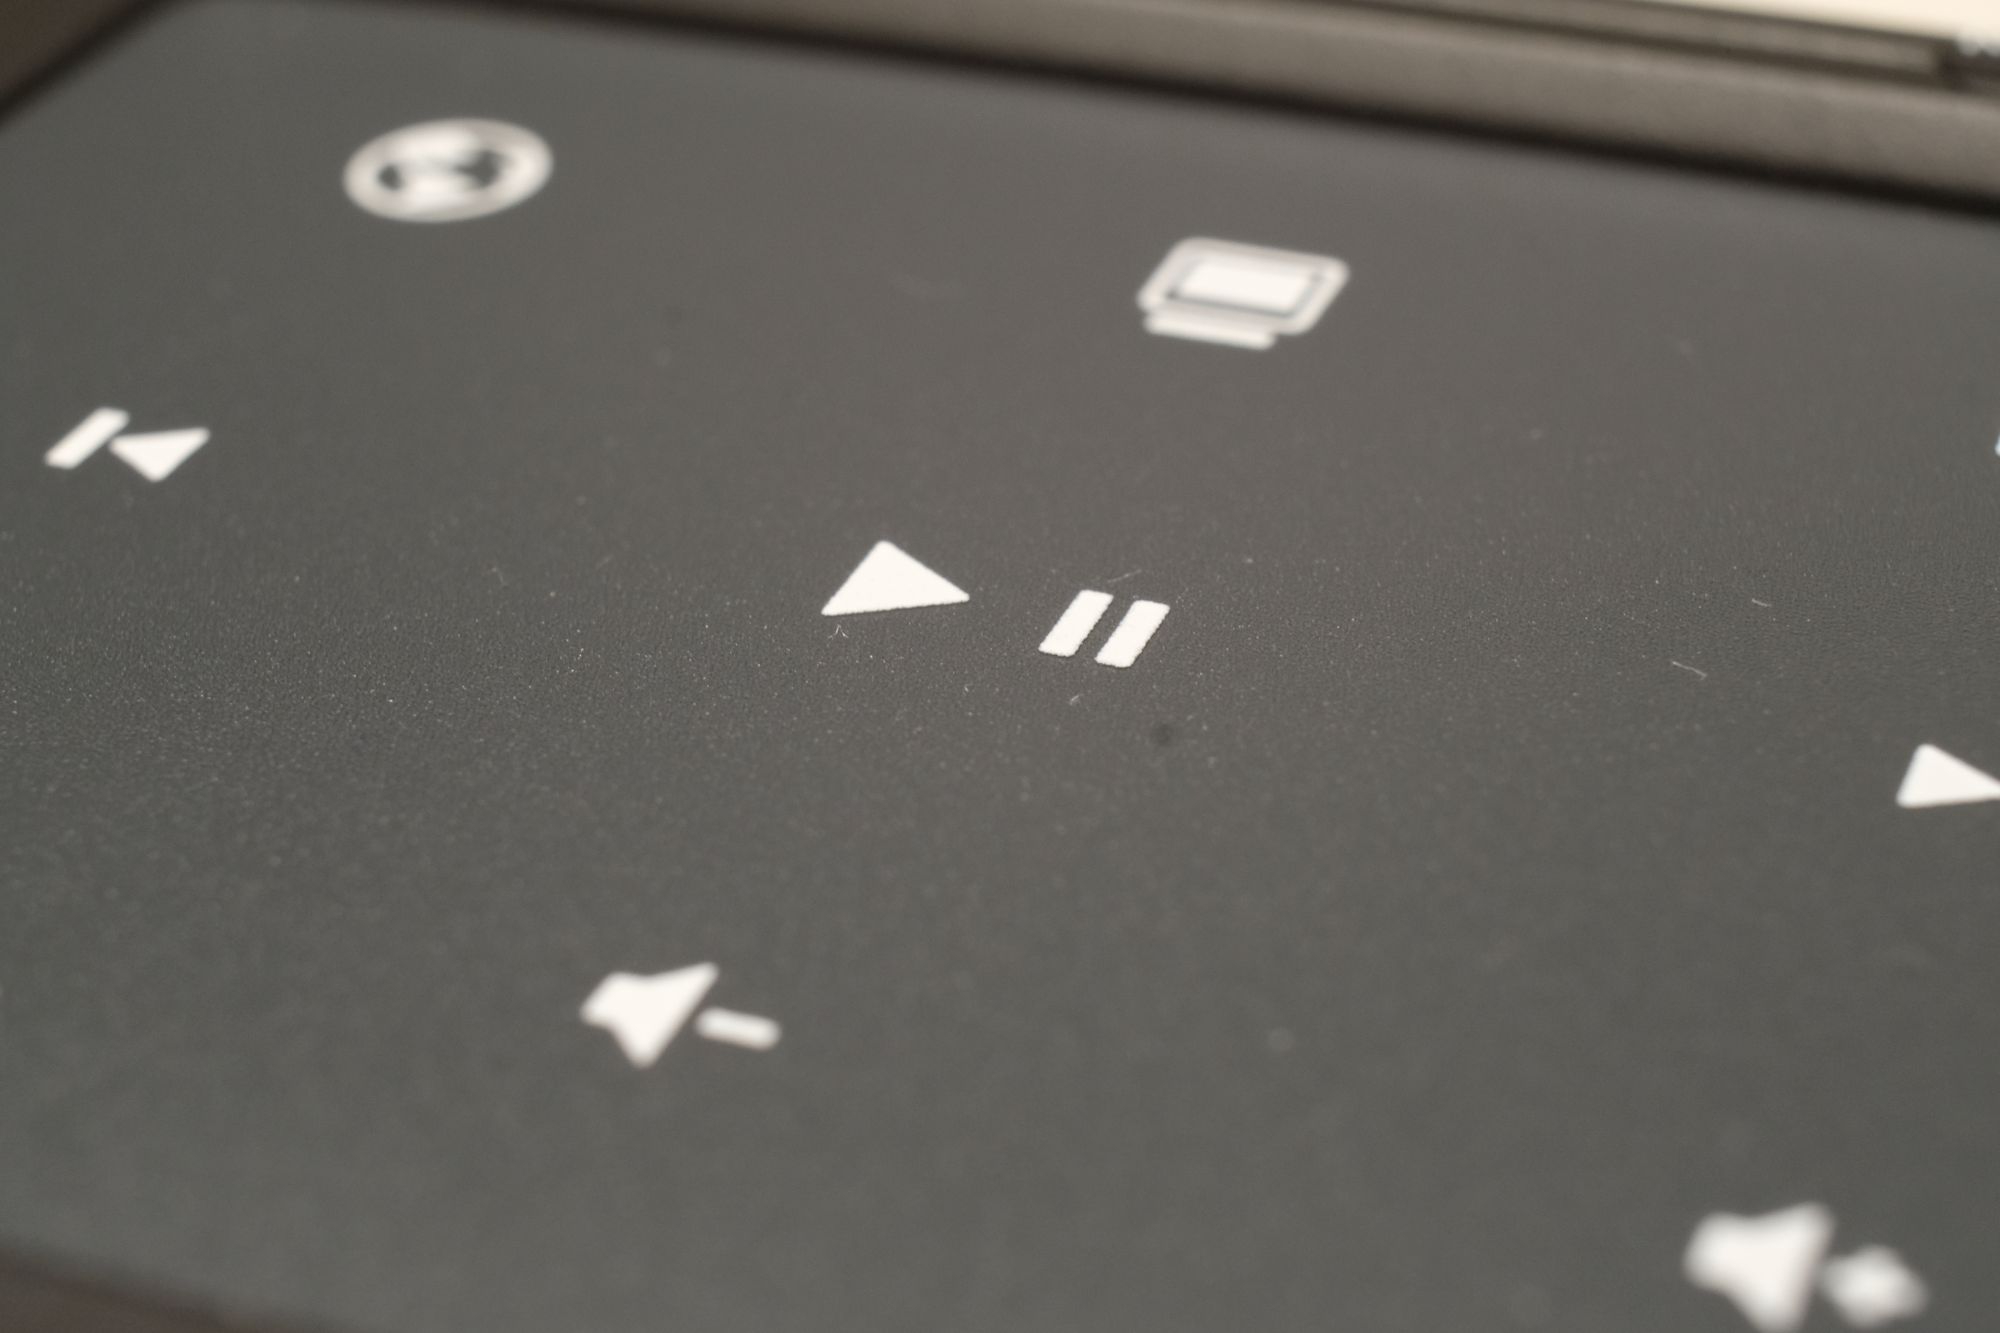 Macro photo of the trackpad, which shows the slightly textured surface, along with the set of functions keys available (Play/Pause, Previous, Next, Volumn Down, Volumn Up, and more.)